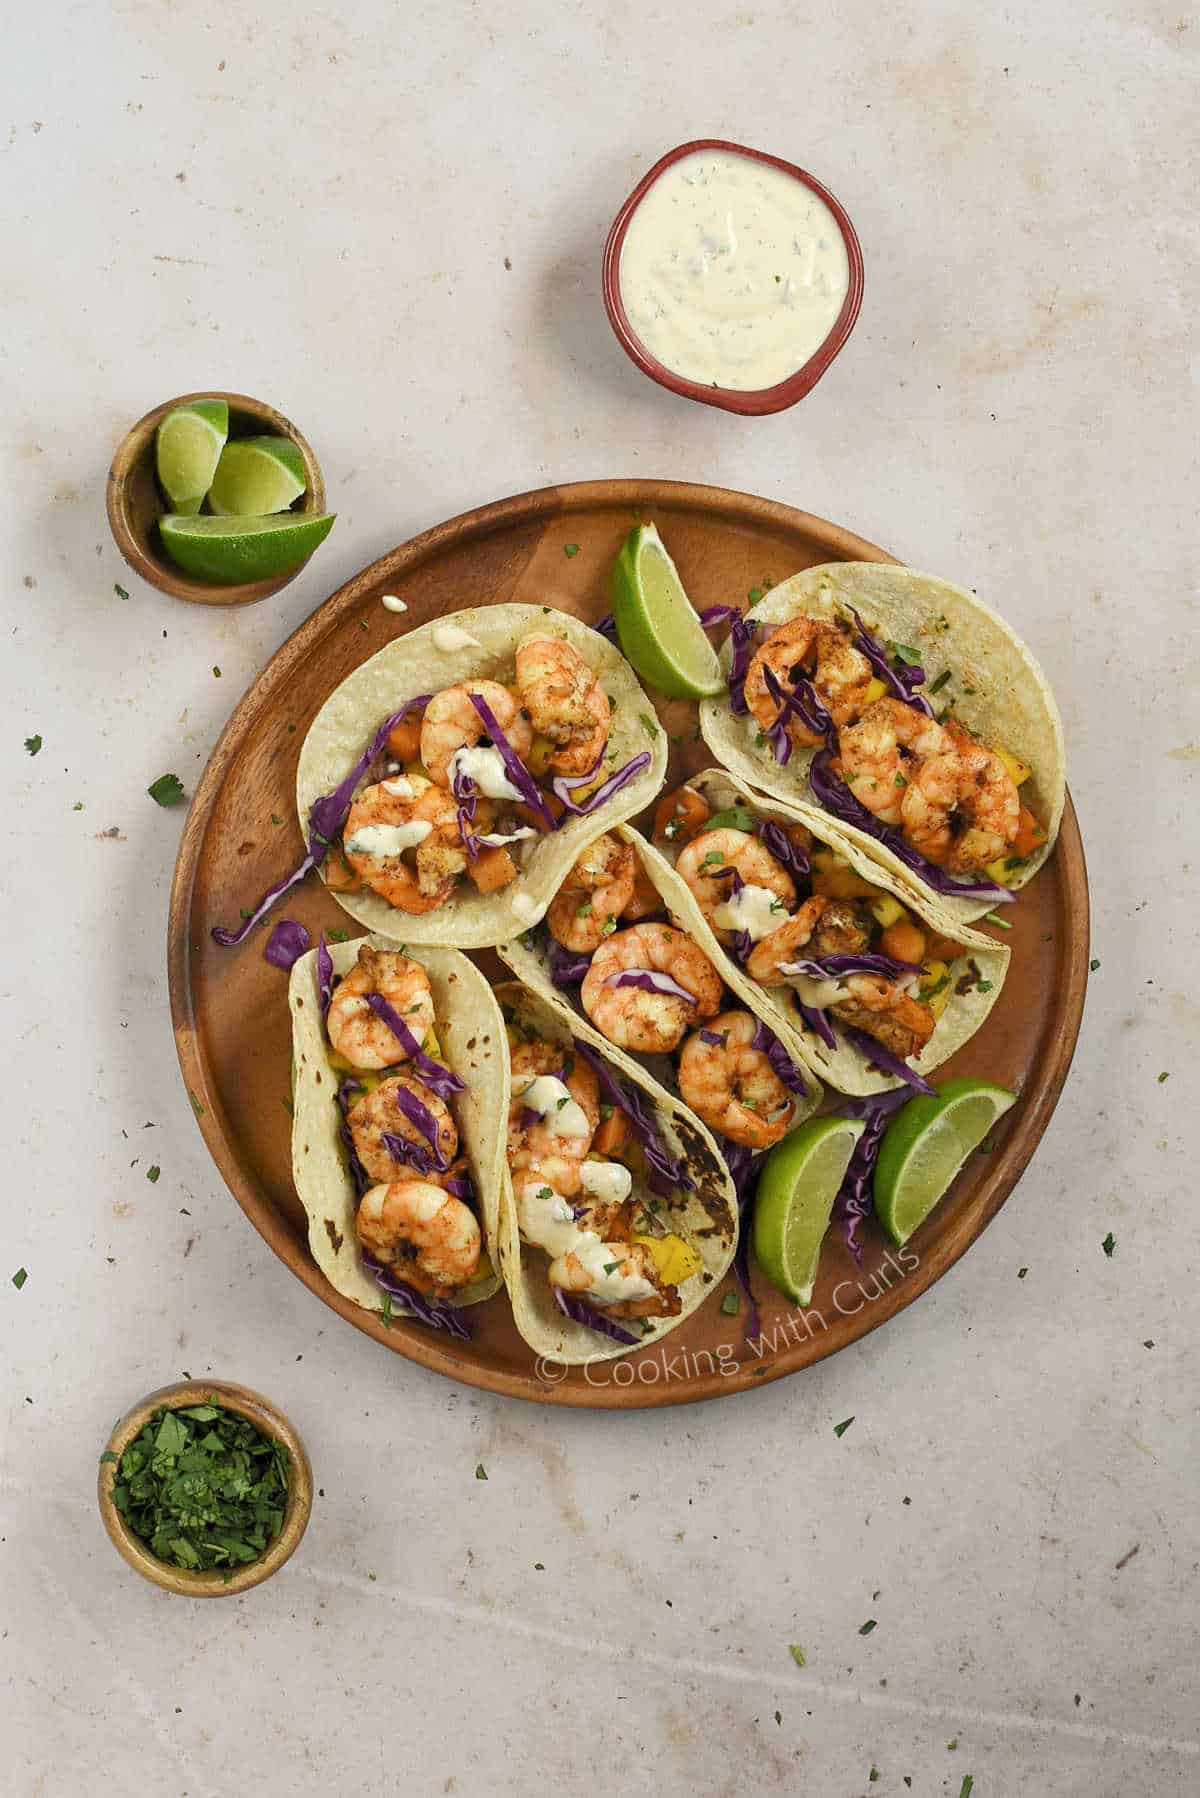 Looking down on a plate of grilled shrimp tacos with small bowls of lime wedges, chopped cilantro, and chipotle crema.